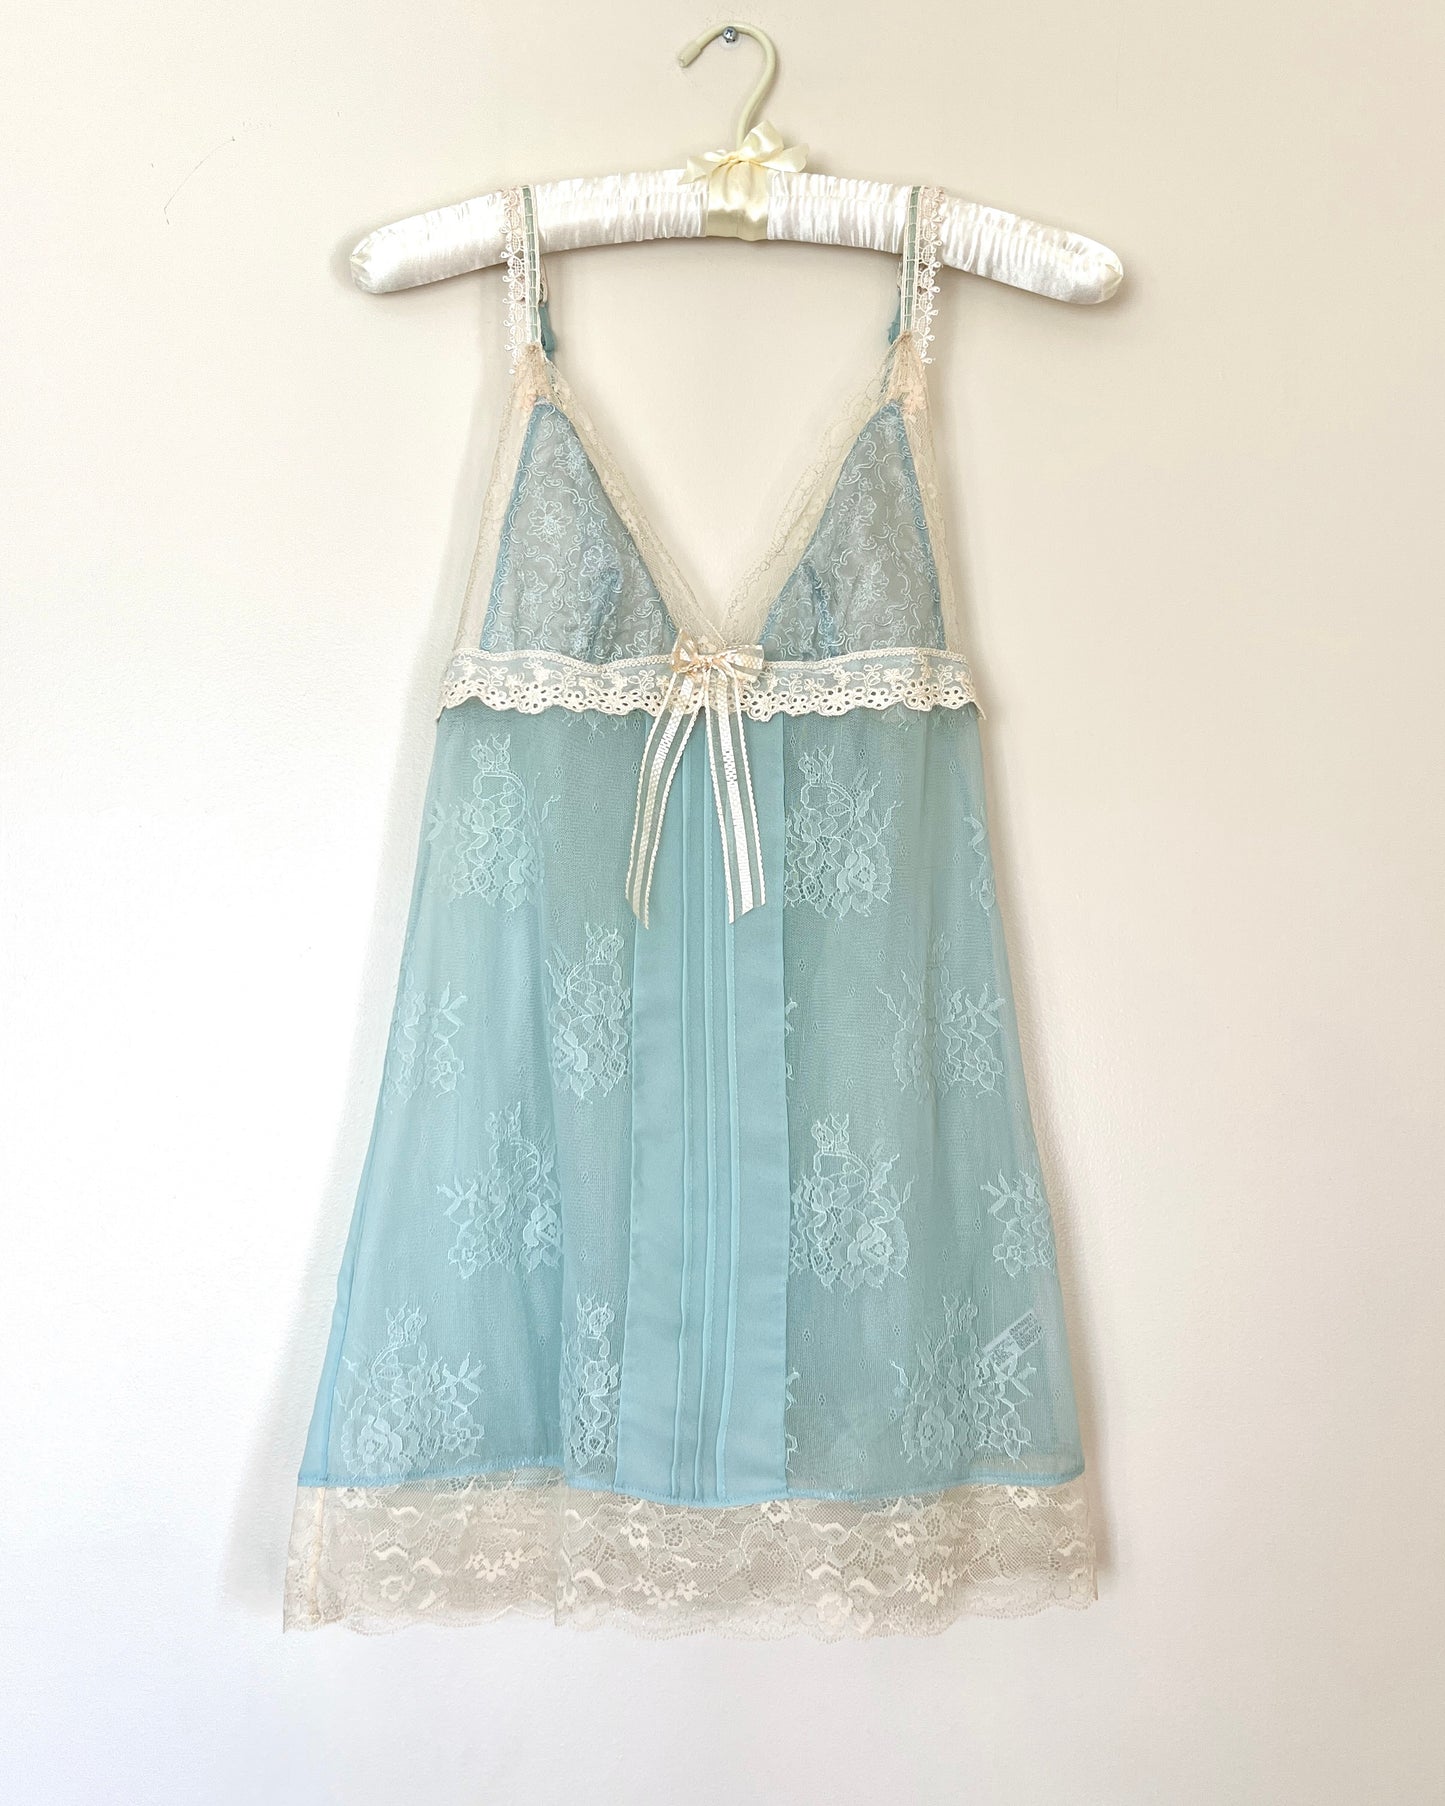 Fairycore Sheer Floral Embroidery Babydoll Slip featuring White Lace Lining